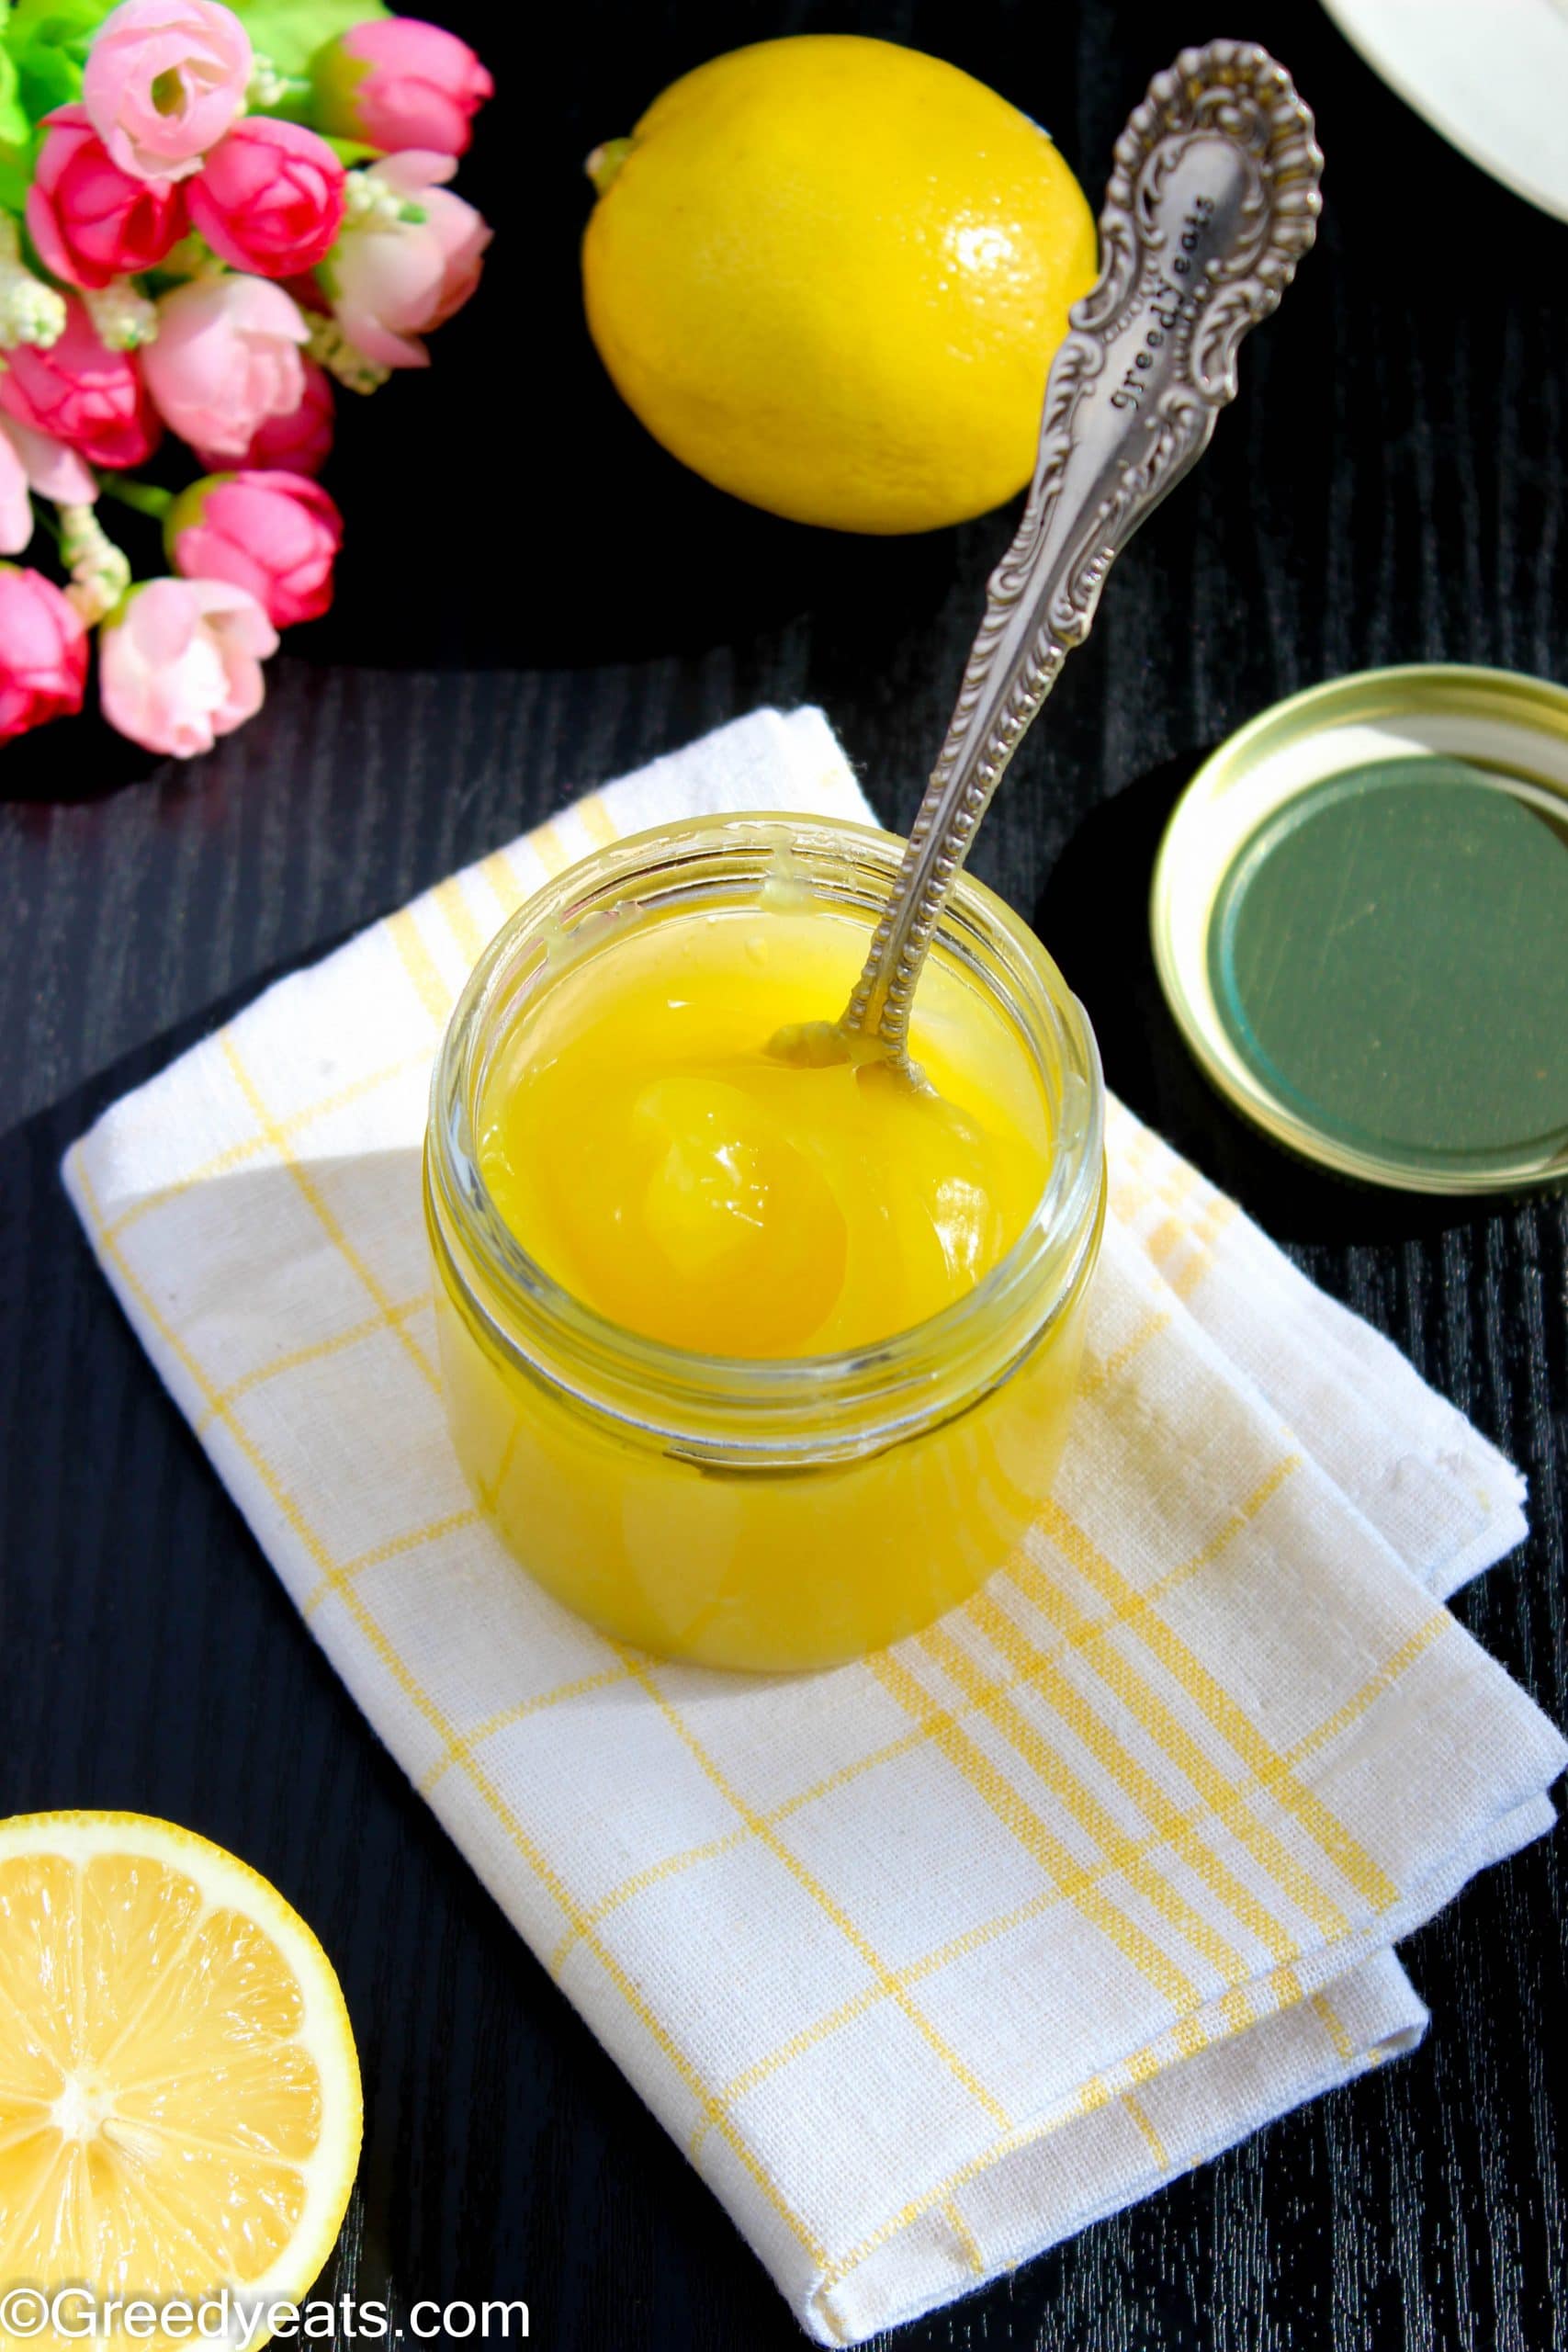 Quick and easy Microwave Lemon Curd made under 5 minutes. It tastes good on almost everything!